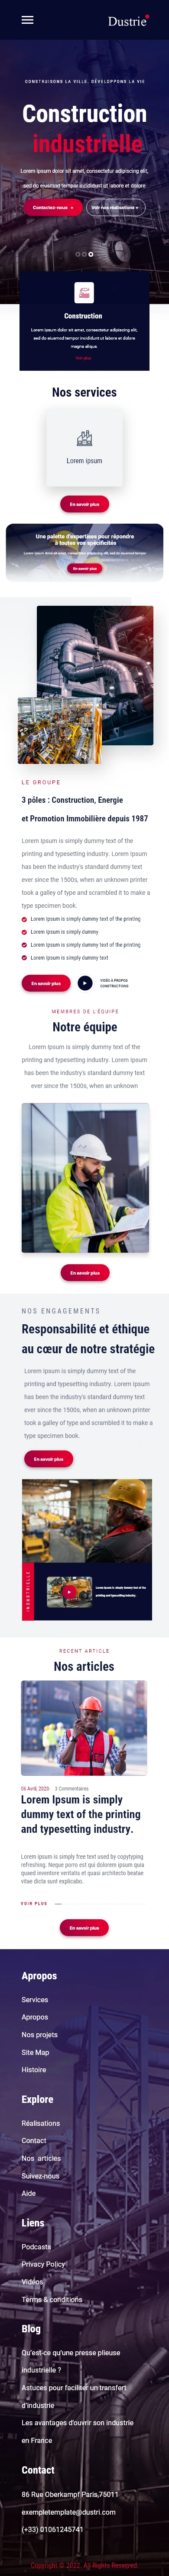 Template-industrie